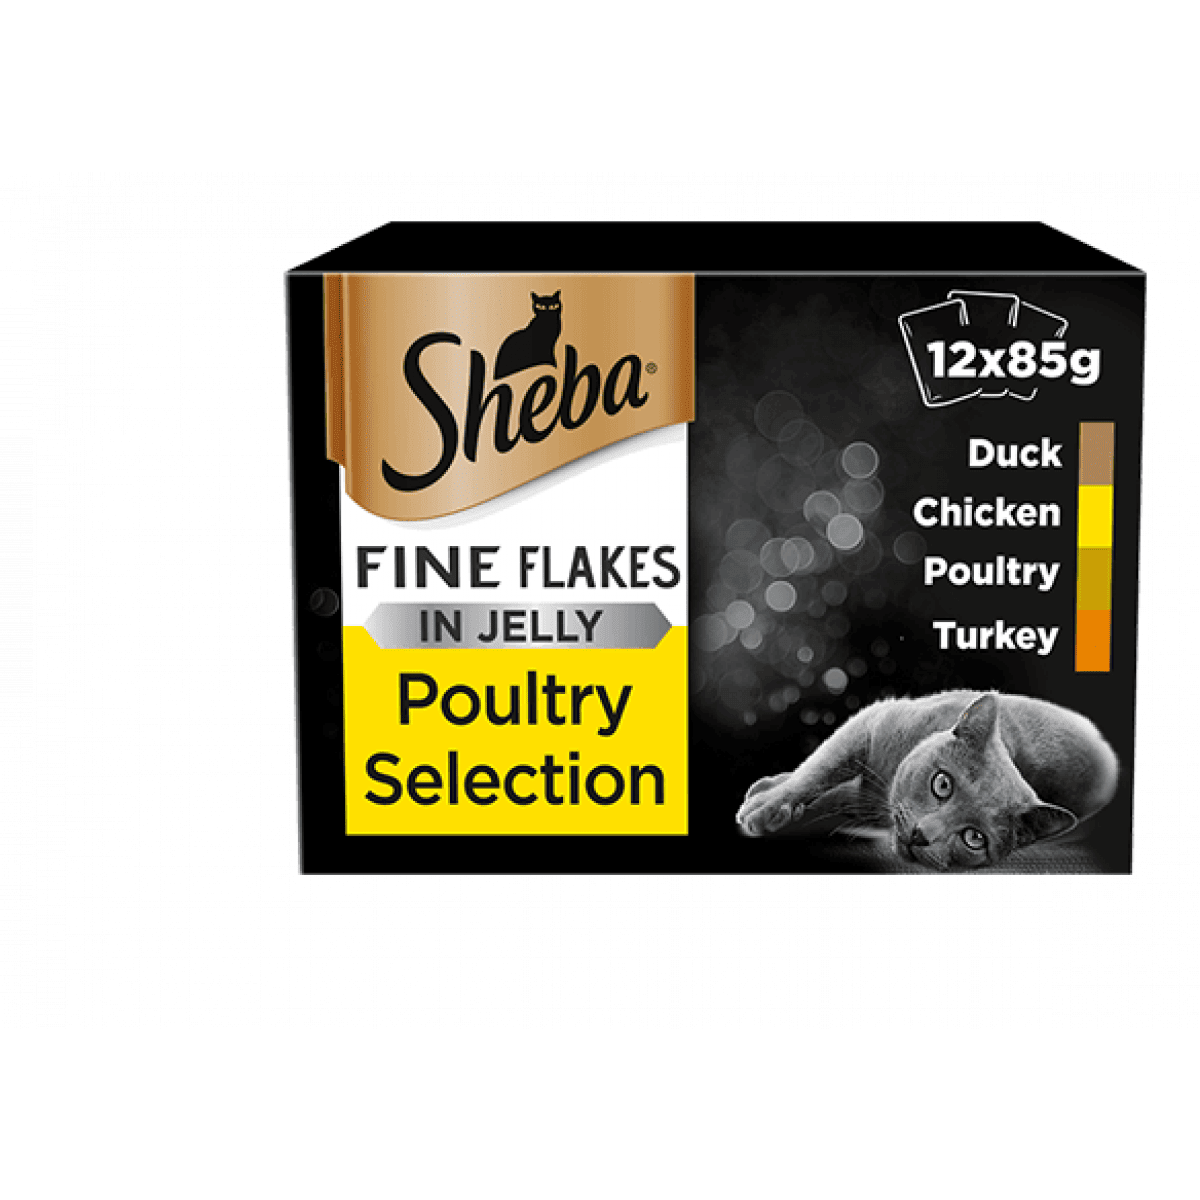 Sheba FF Poultry Selection in Jelly 12 x 85g Product Image